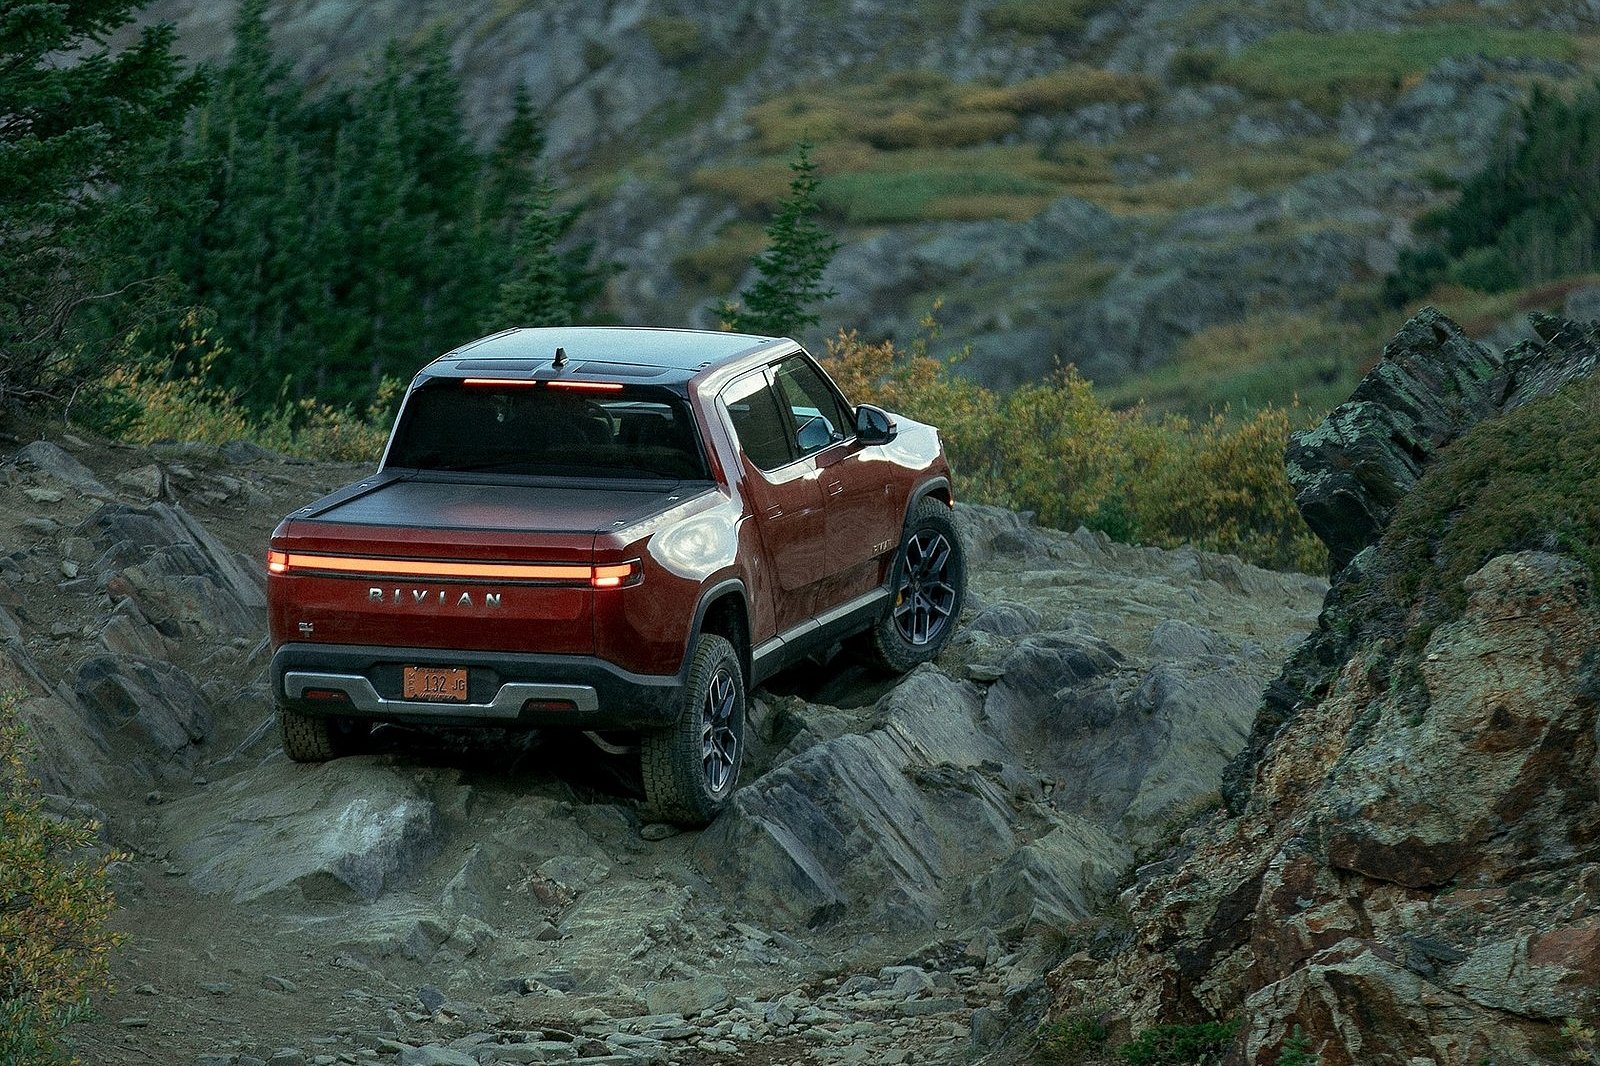 Rivian Dominates Consumer Reports' Annual Survey, Earning Top Marks and Consumer Adoration